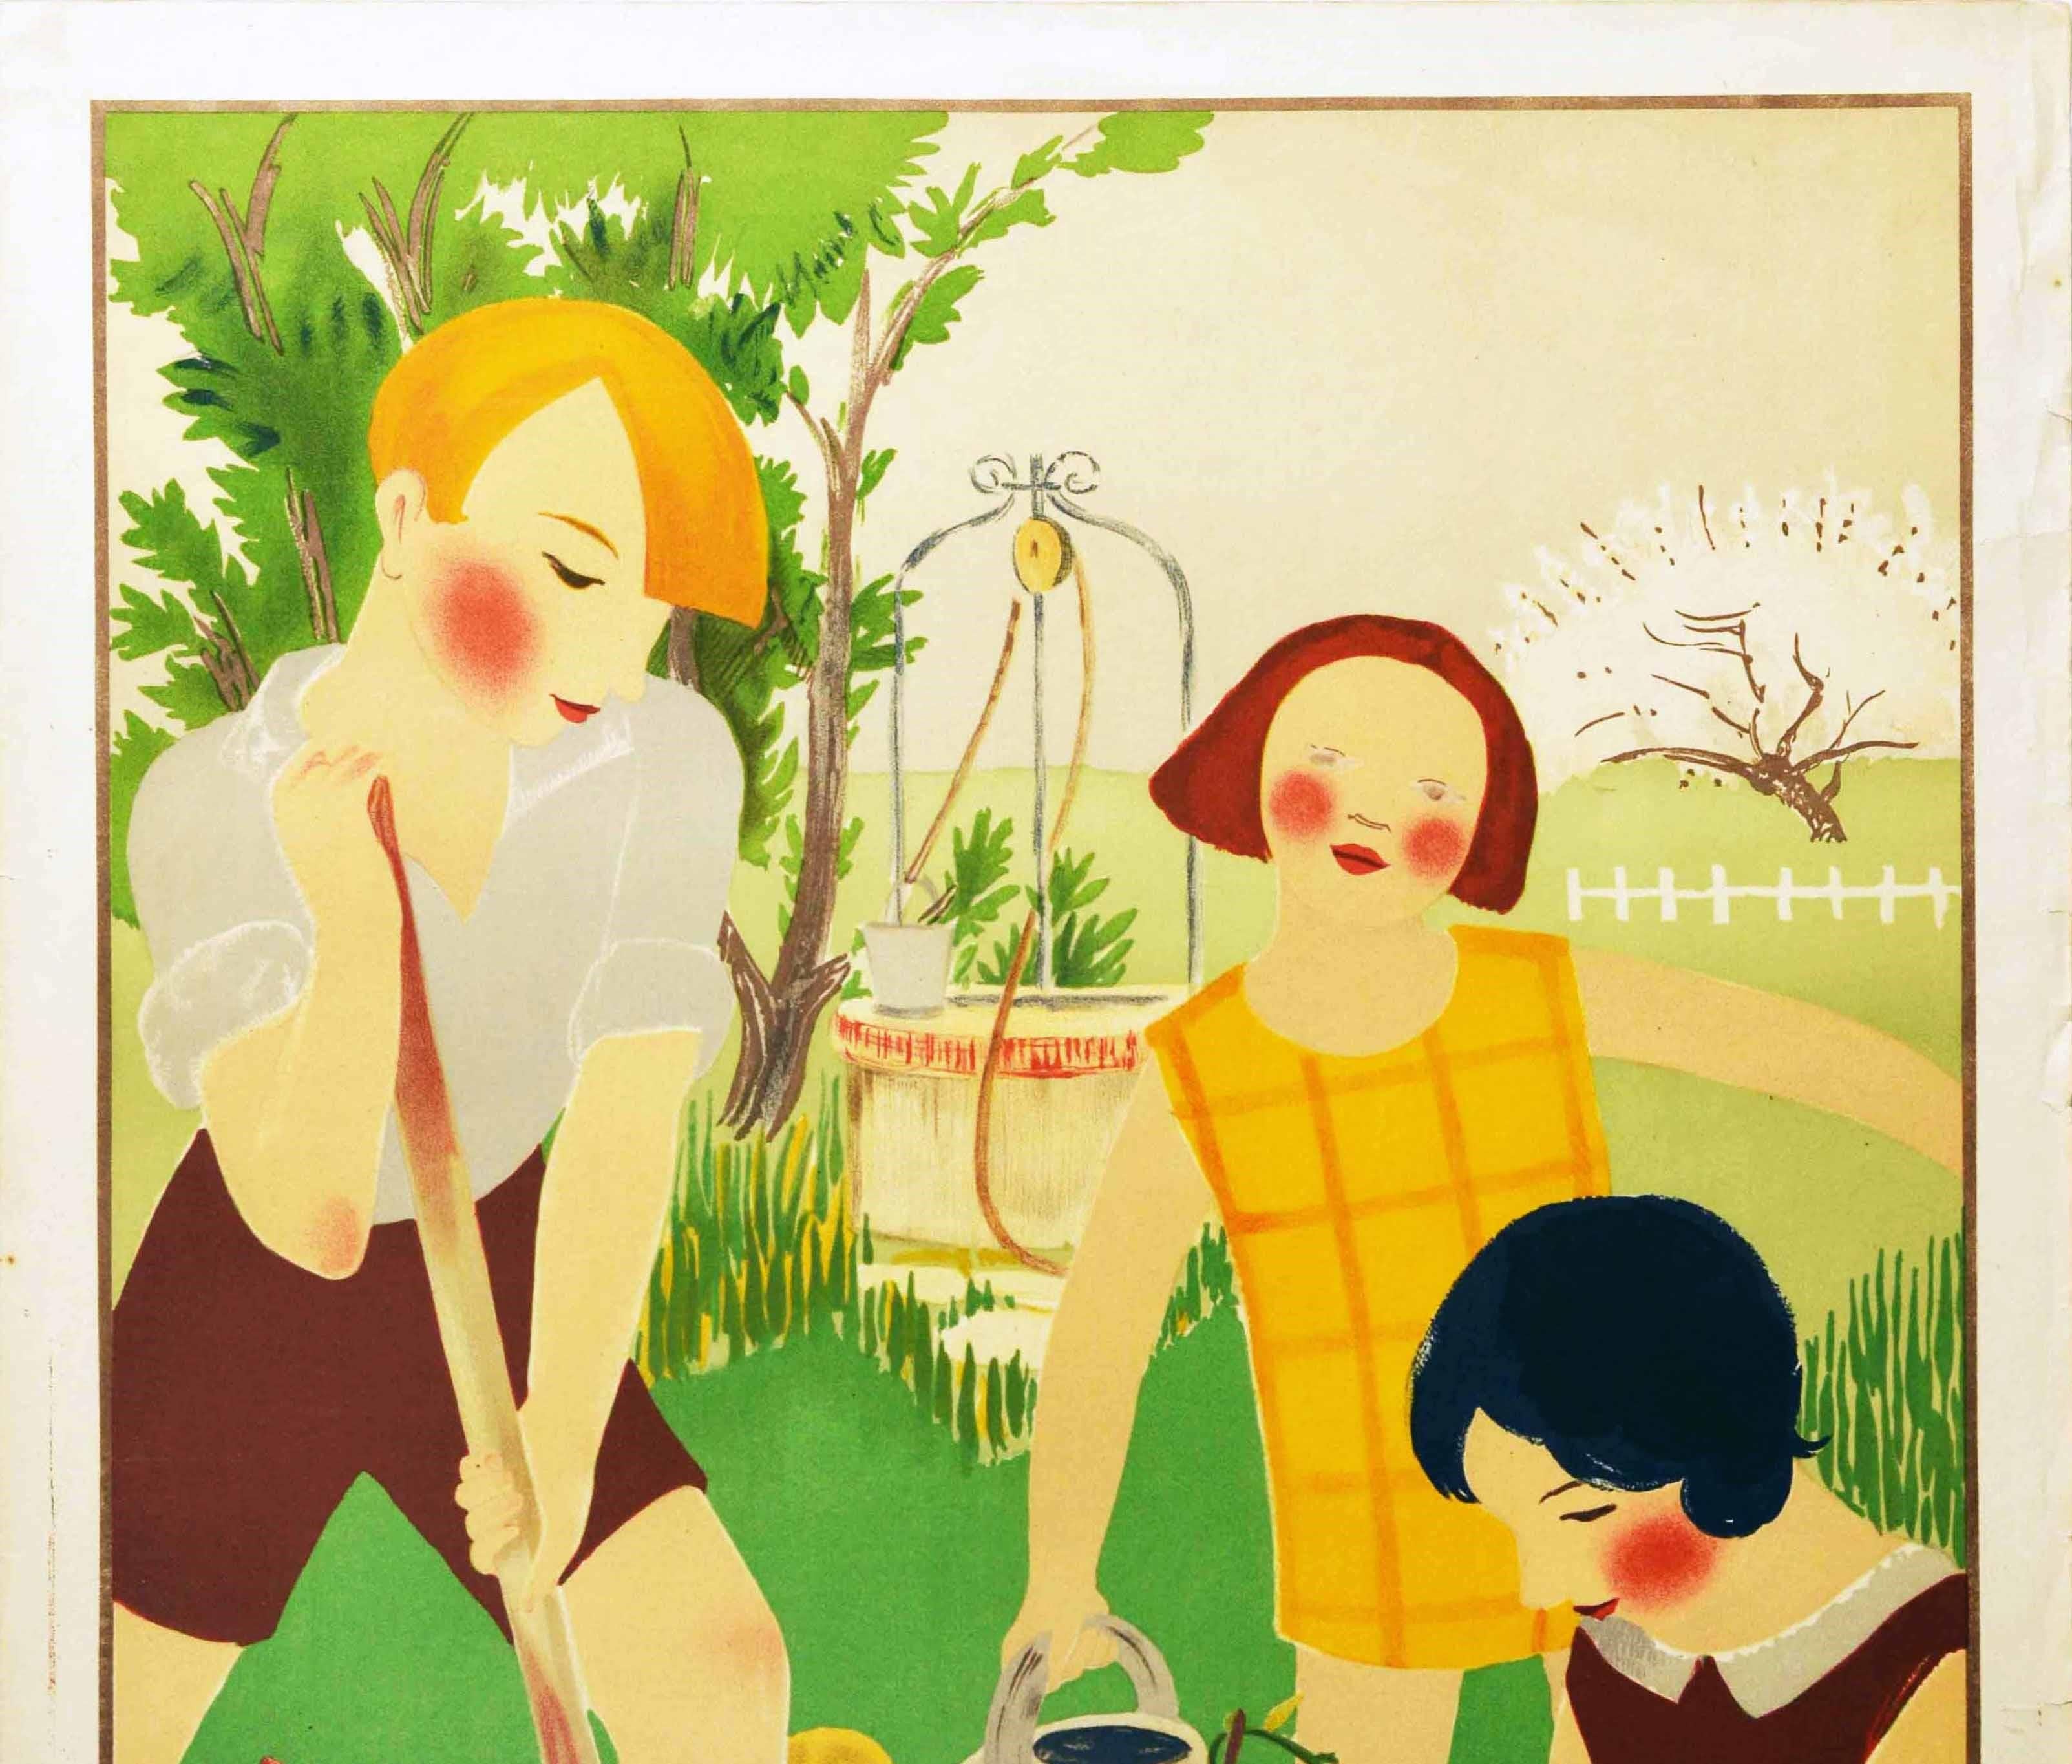 Original vintage Art Deco advertising poster entitled School Art Competition / Concours de L'art a l'ecole featuring a colourful illustration of a teacher and schoolchildren gardening - the boy is digging with a spade while the teacher holds a